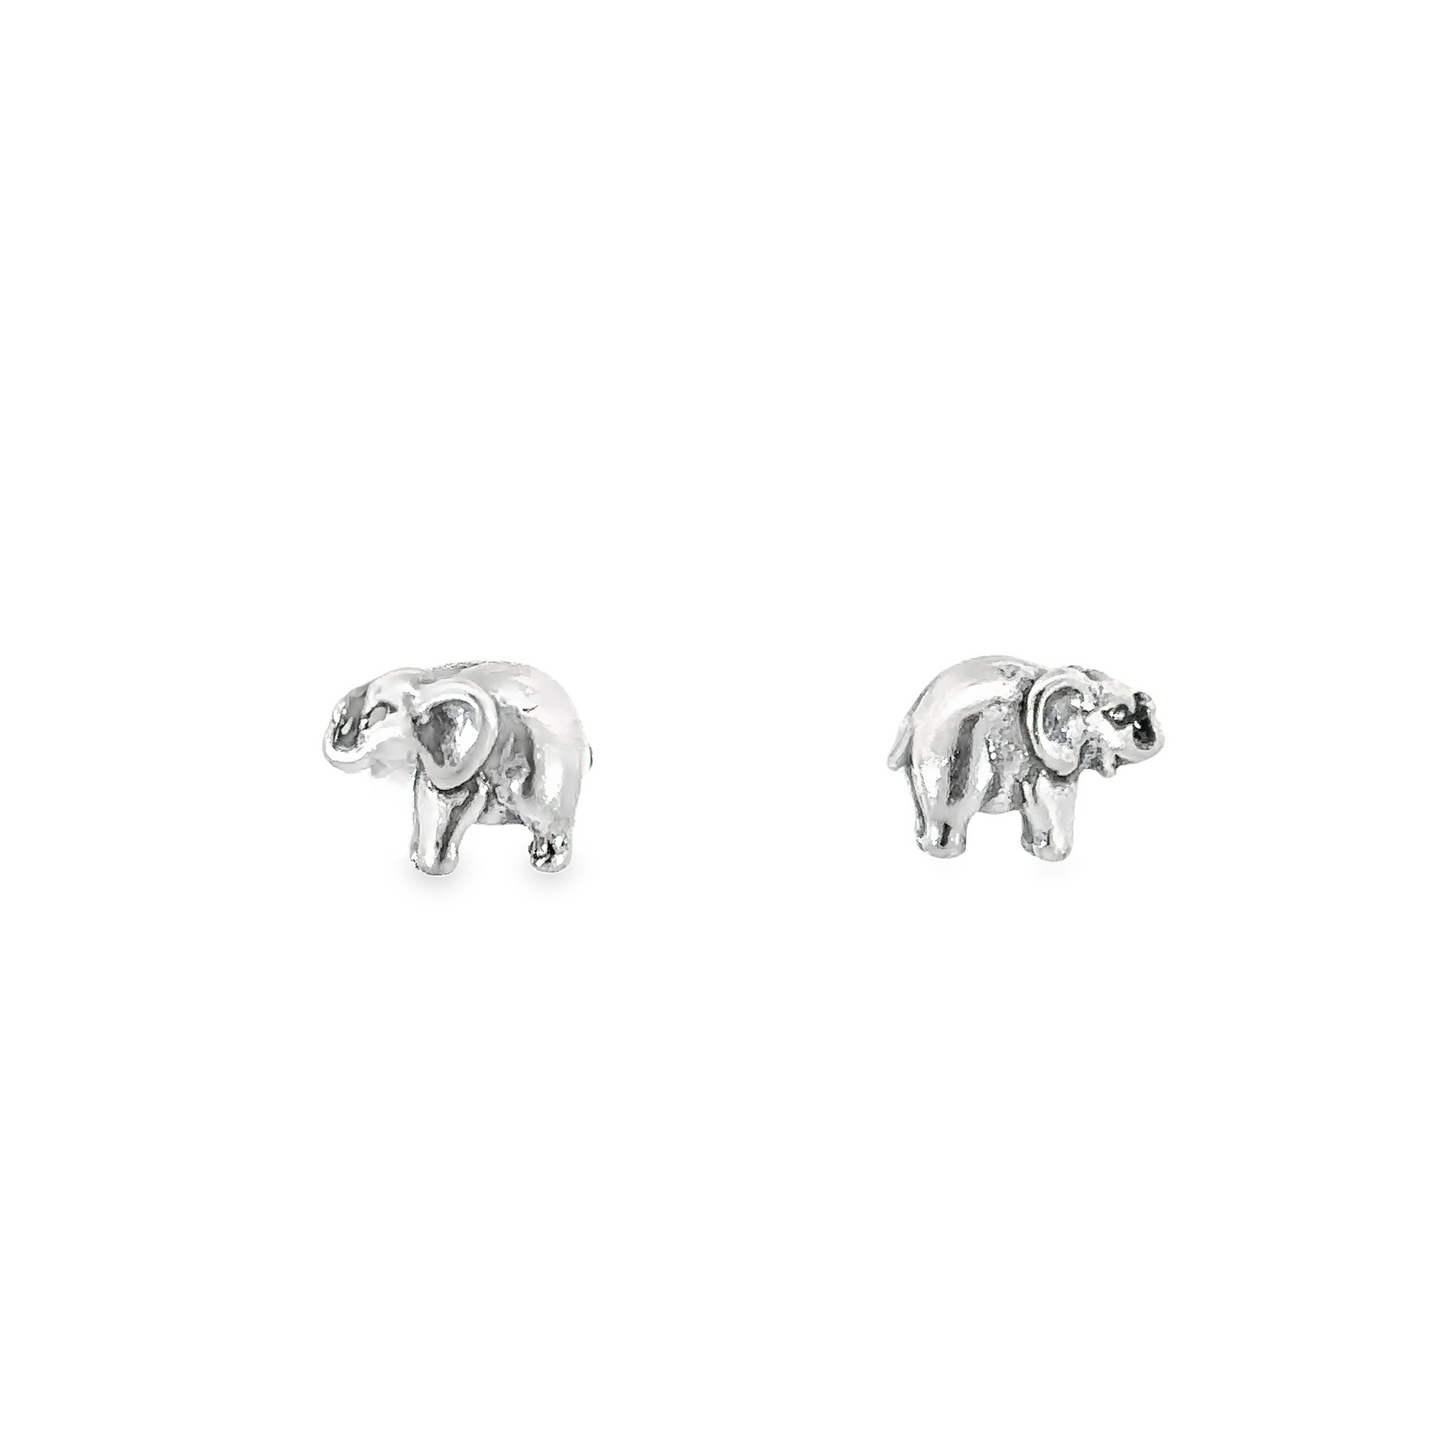 A pair of Elephant Studs on a white background, perfect for the animal lover.